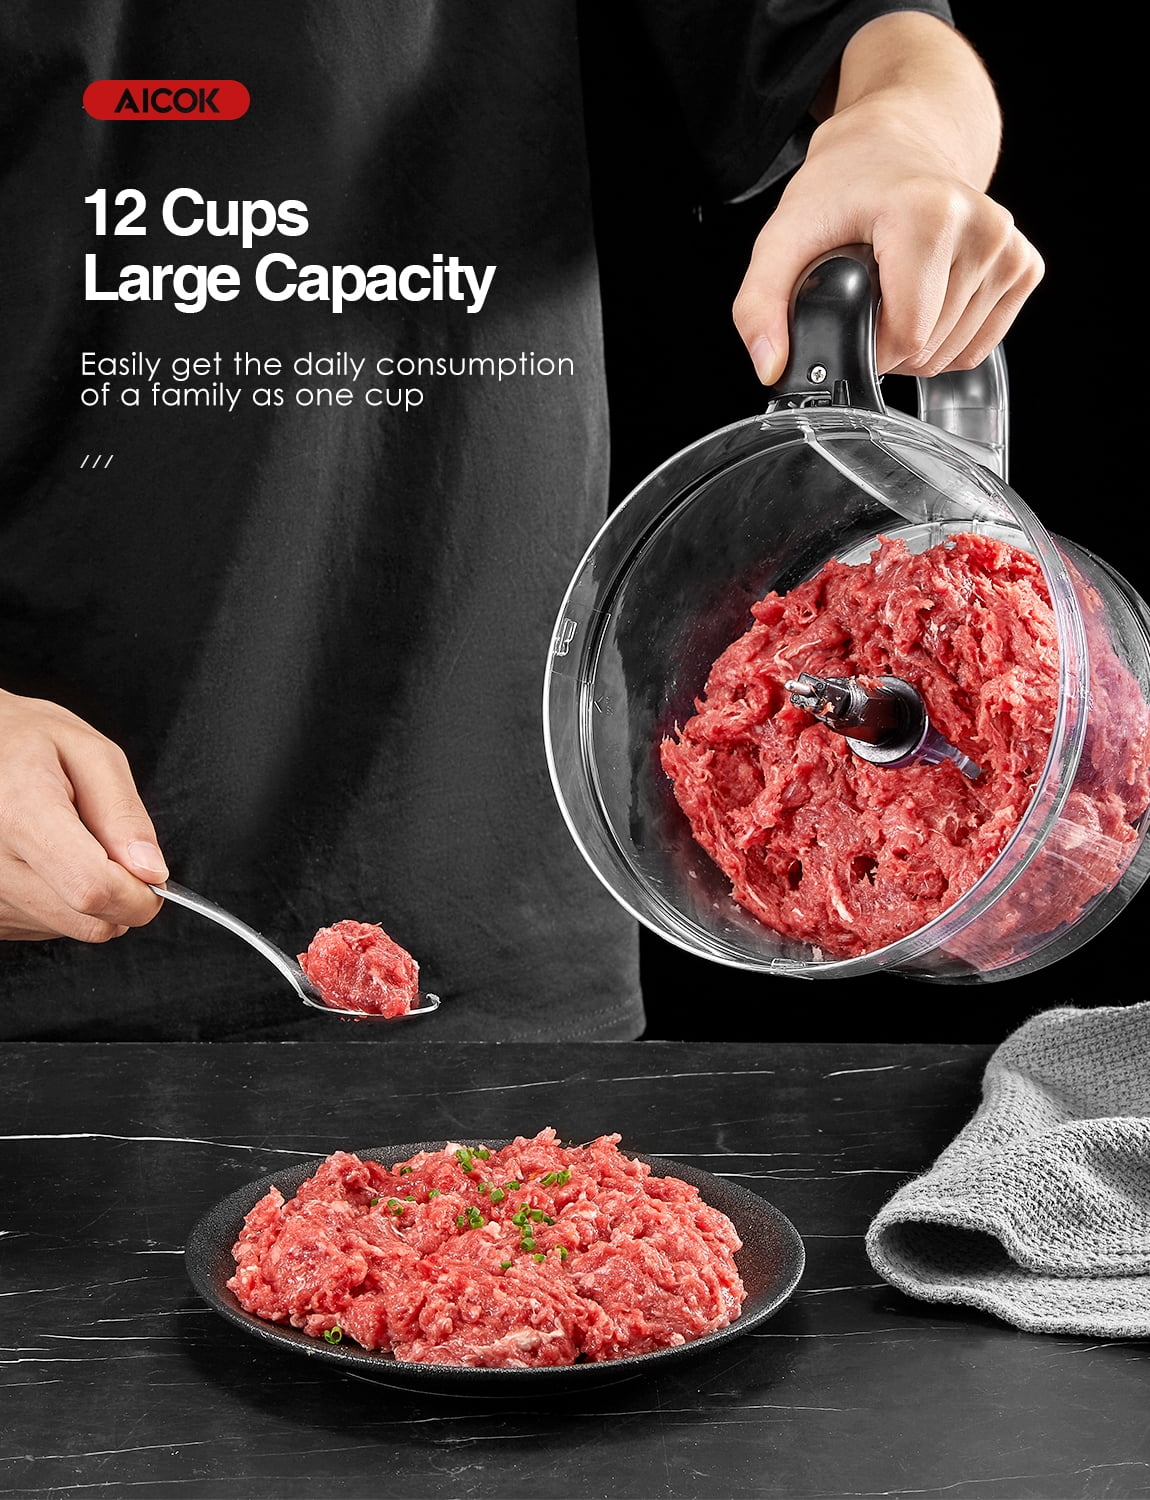 Aicok 12 Cup Food Processor, 6 Functions for Chopping, Slicing, Shredding Purees & Dough, Black